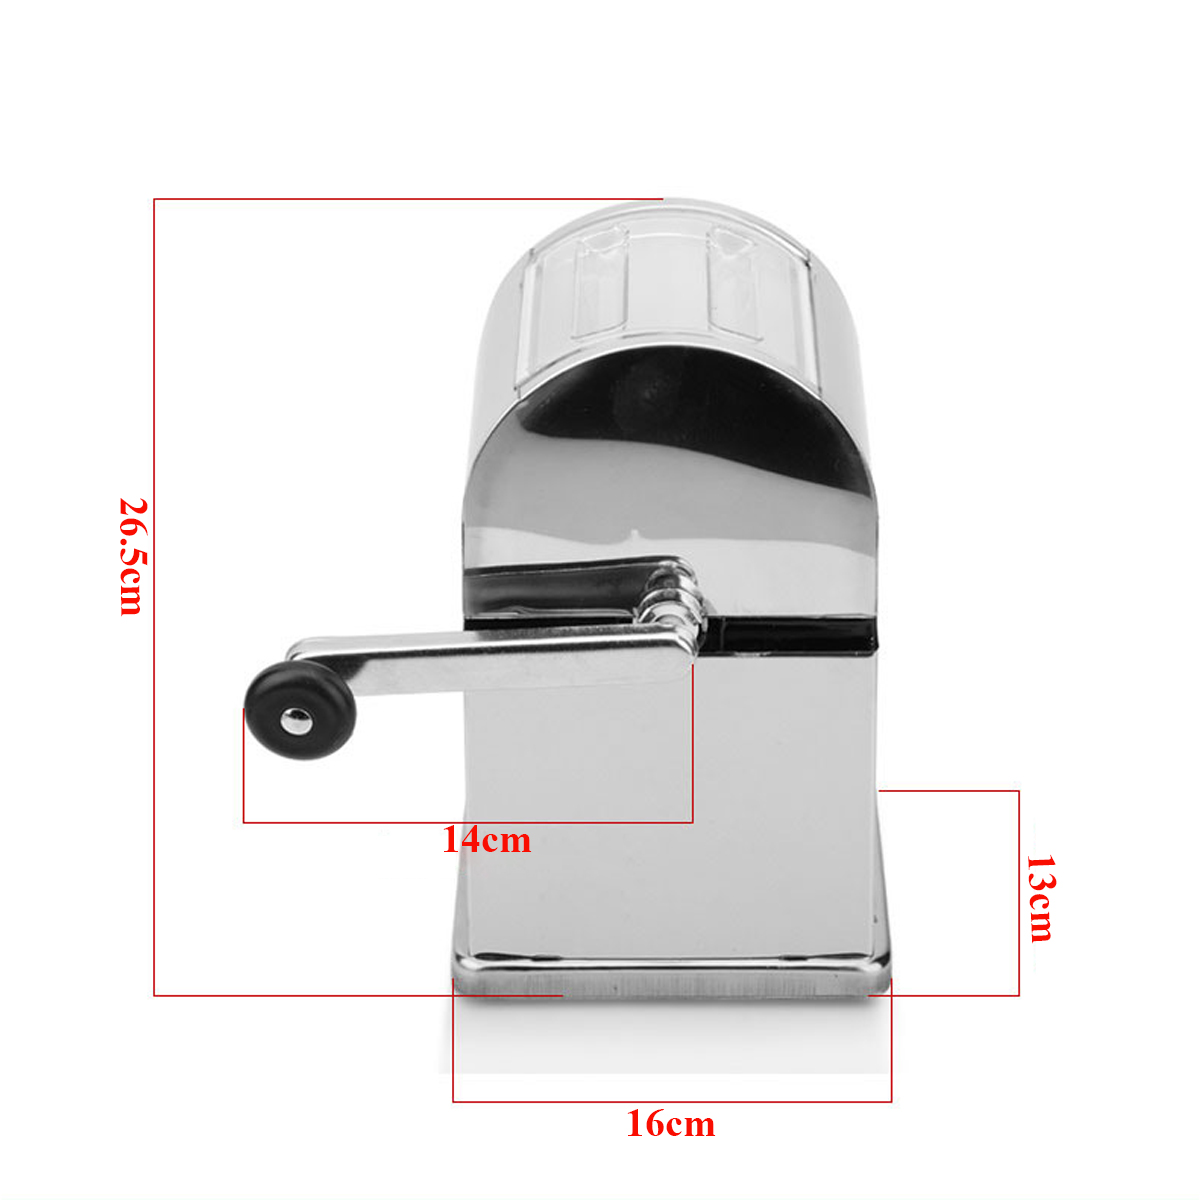 Stainless-Steel-Home-Bar-Manual-Ice-Crusher-Shaver-Machine-Tray-amp-Scoop-Maker-1369038